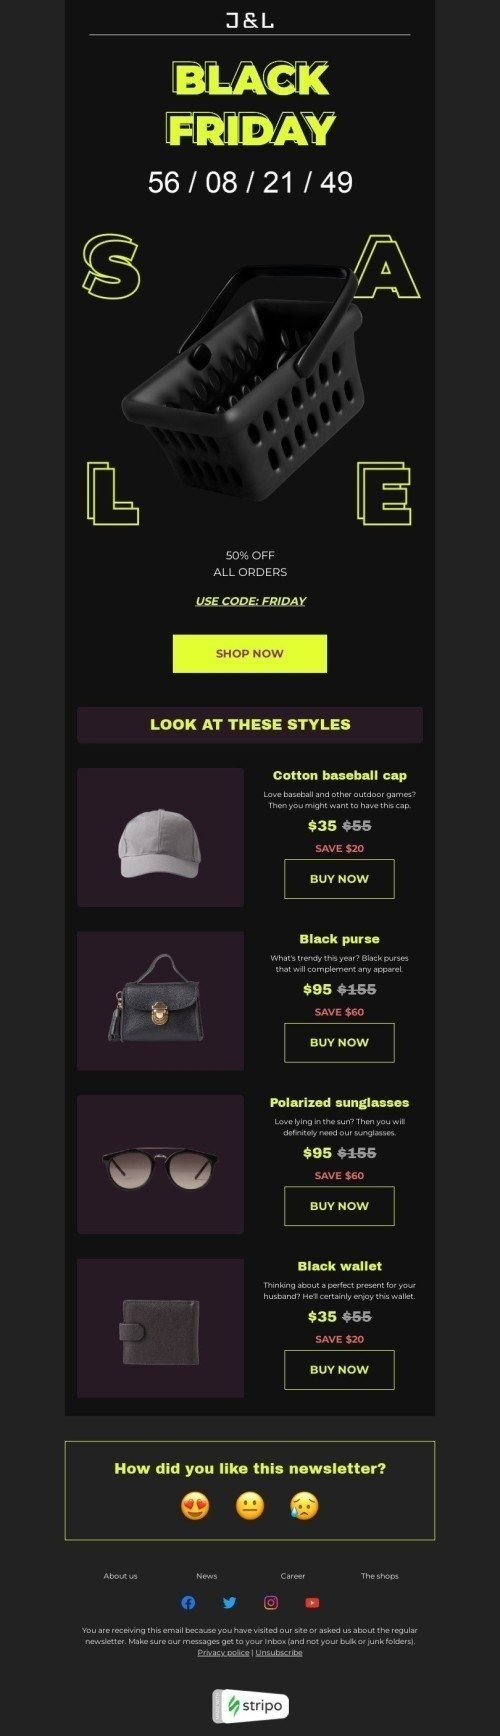 Black Friday Email Template "Look at these styles" for Fashion industry desktop view